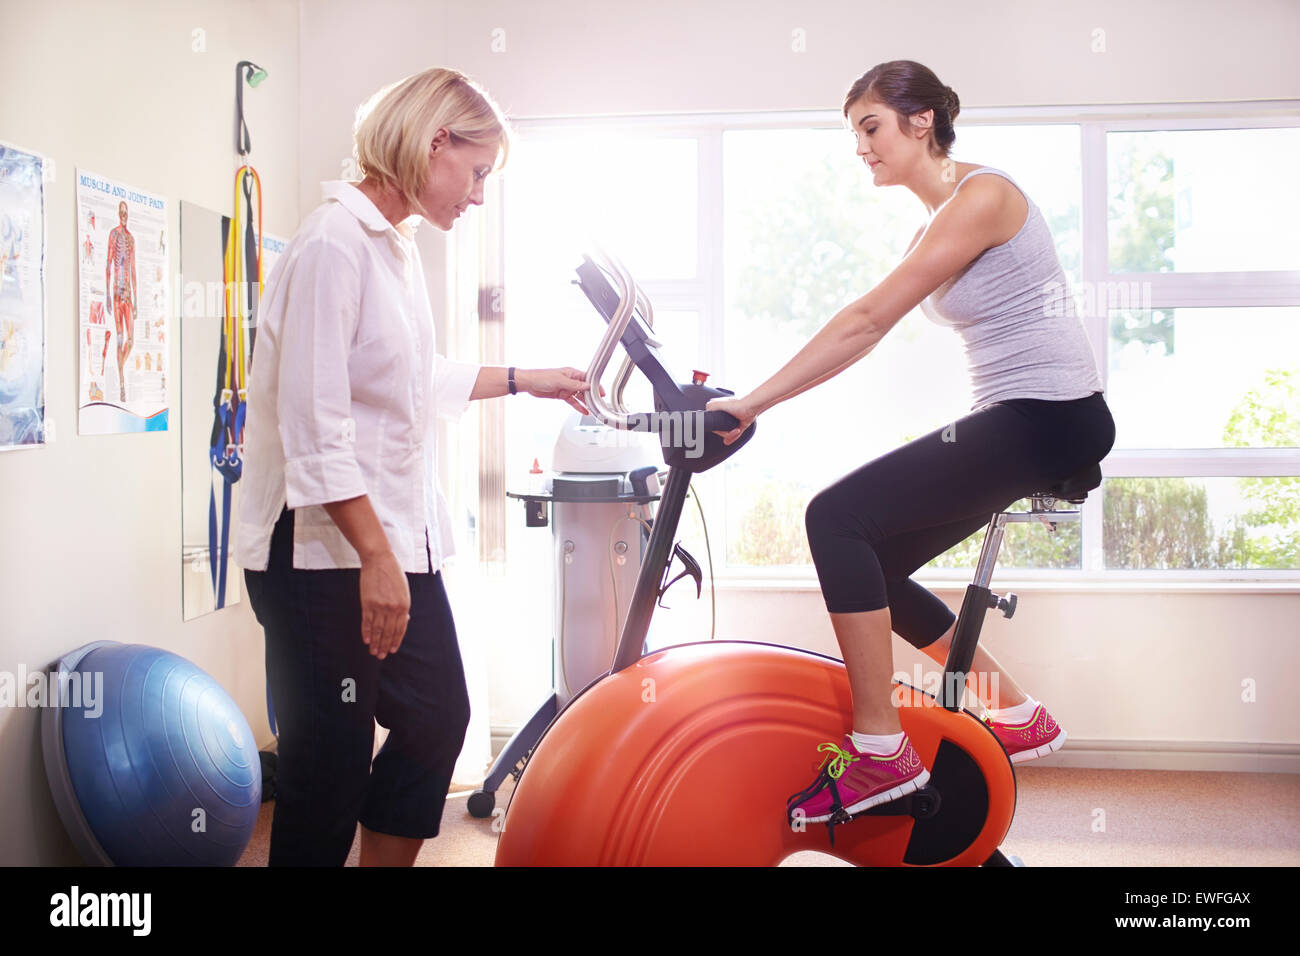 Physical therapist guiding woman on stationary bike Stock Photo